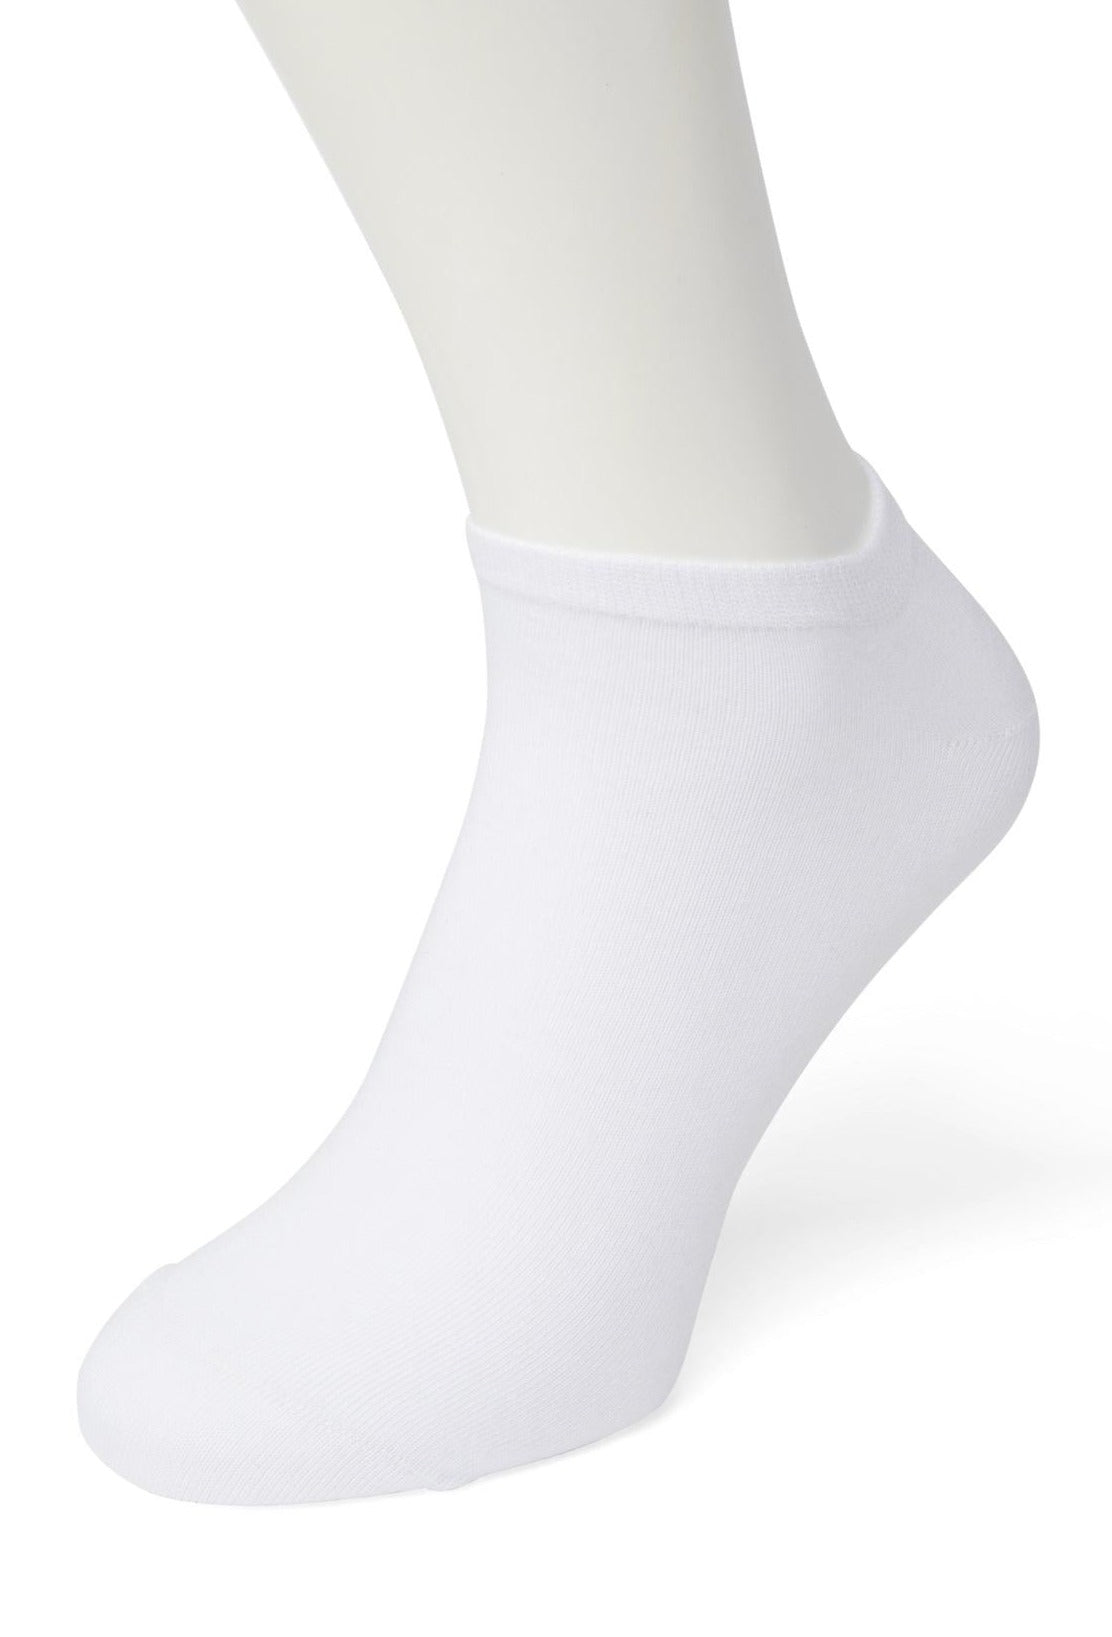 Bonnie Doon BD811001/BE812001/BD913401 Cotton Short Ankle Sock - White Low rise cotton mix socks with flat toe seam and plain elasticated cuff. 